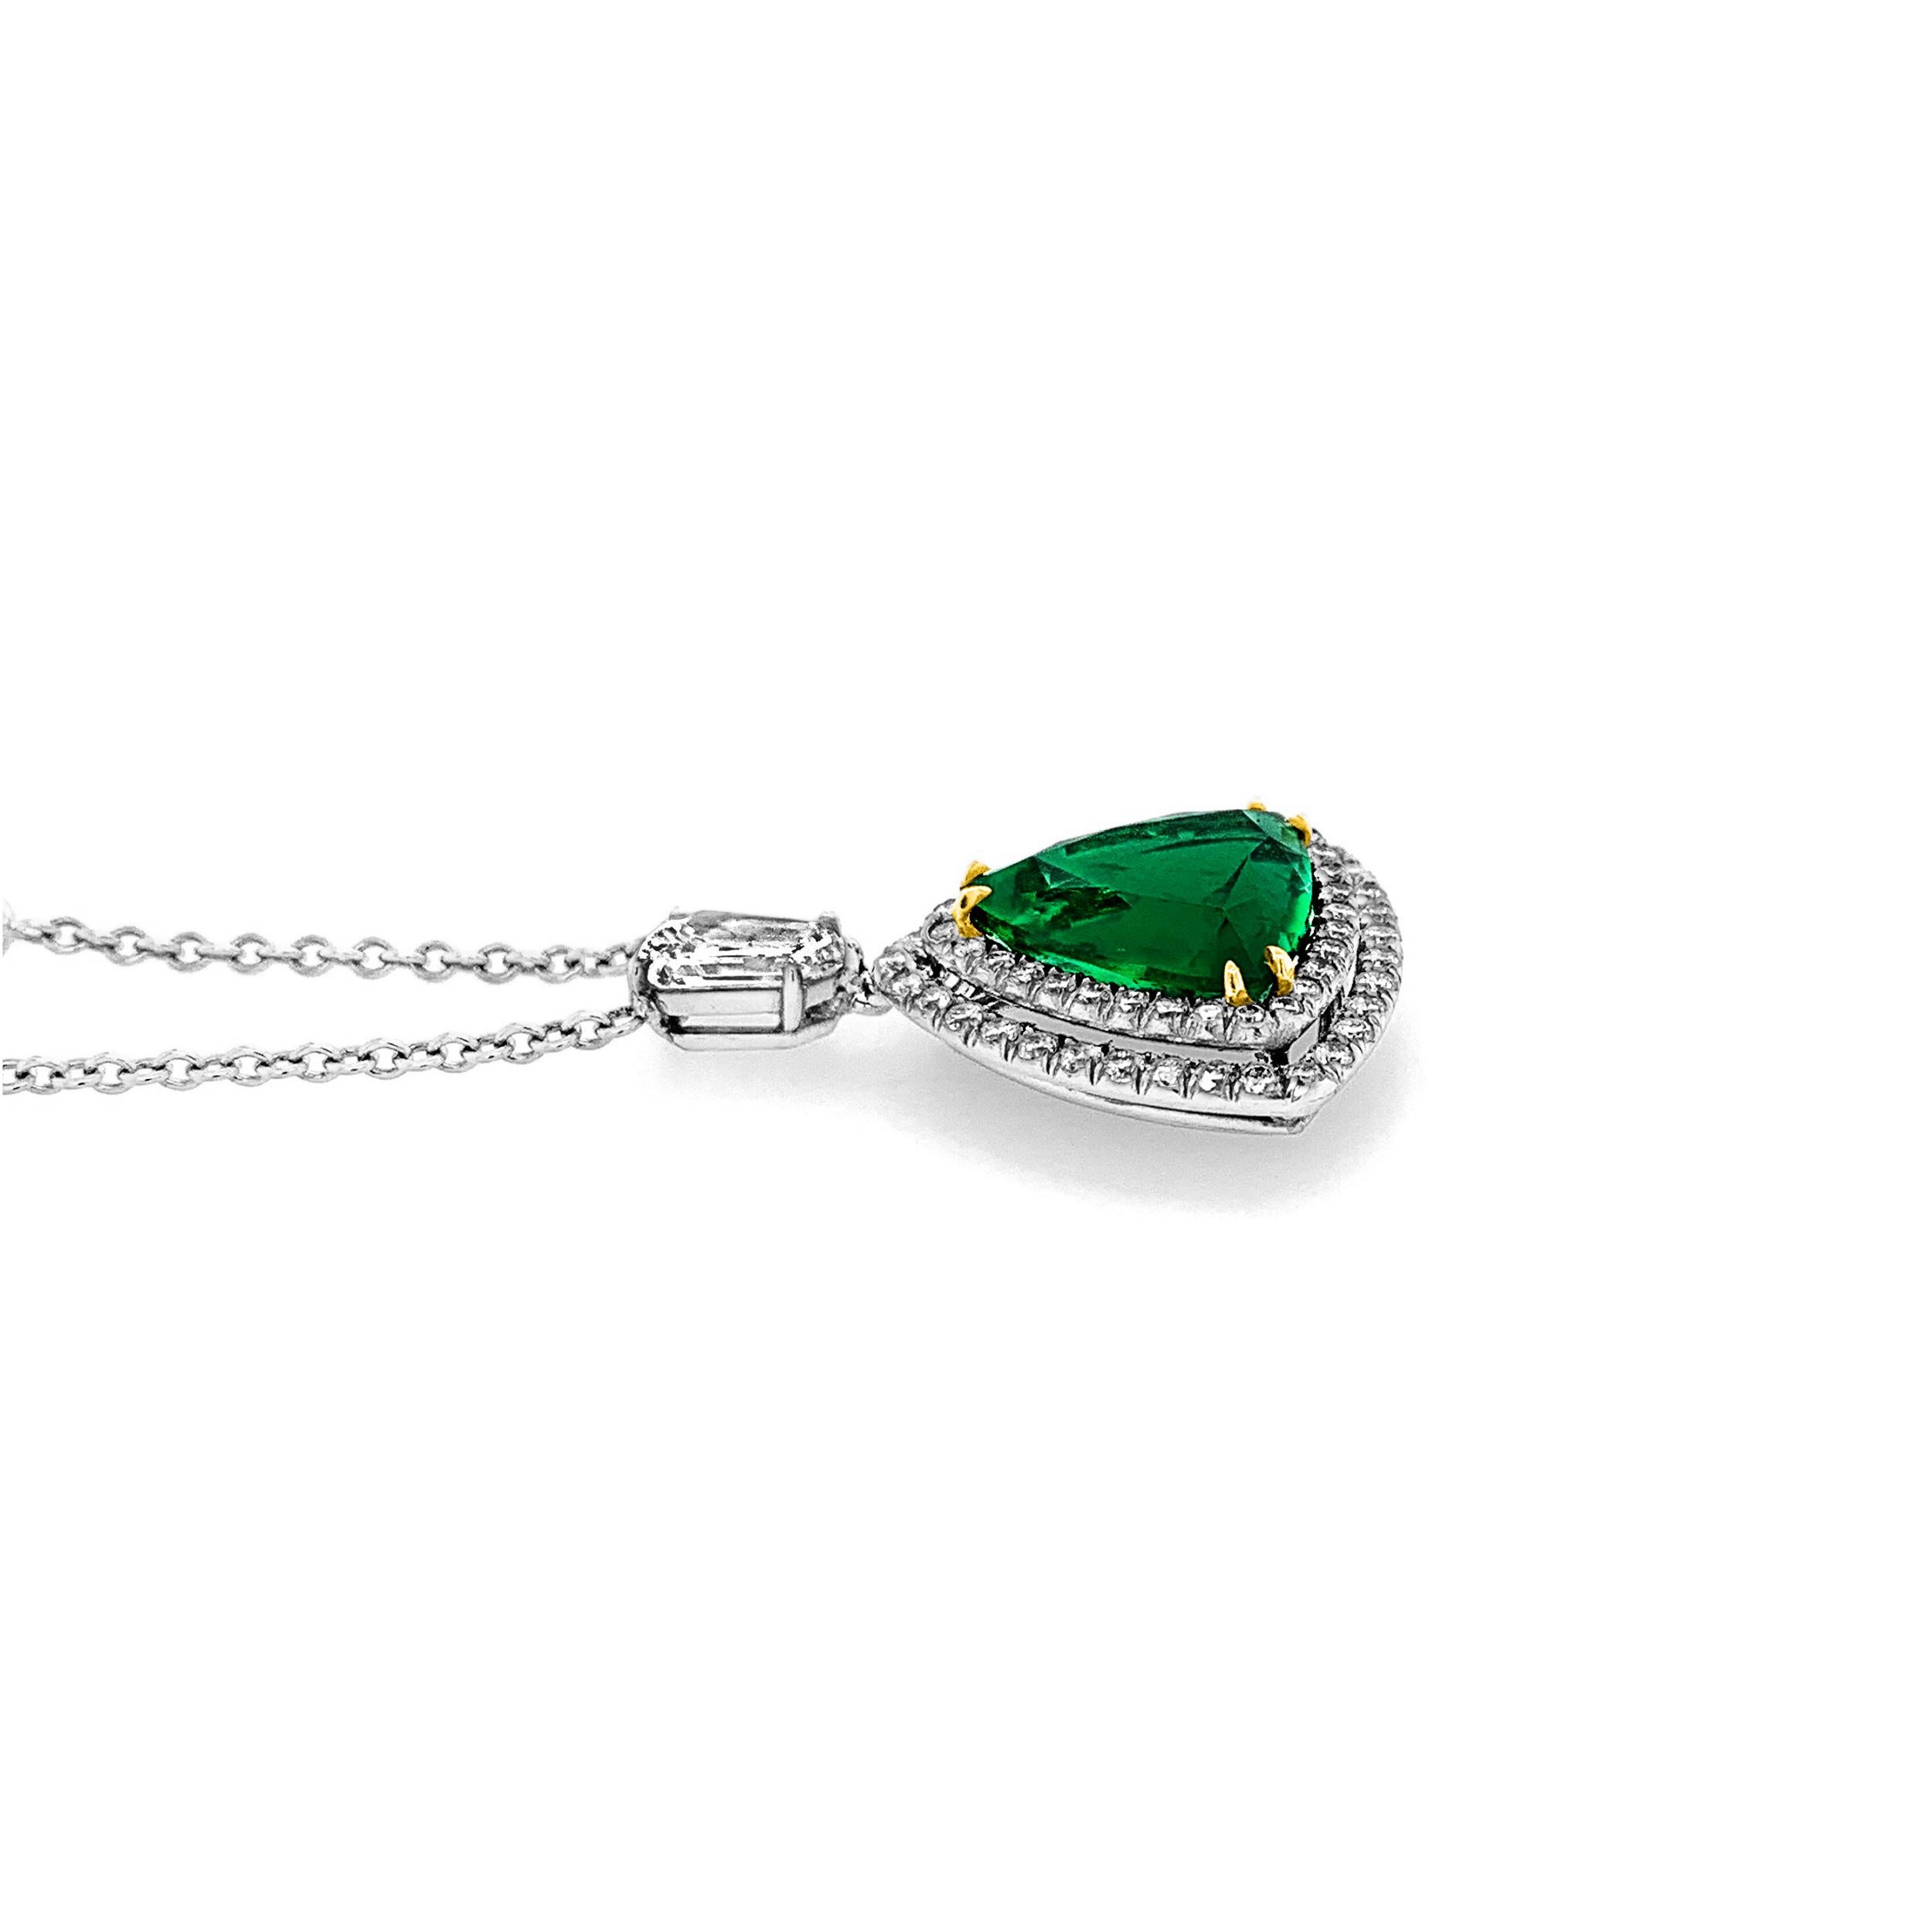 4.75 Carat Trillion Cut Emerald in 18K Yellow Gold Mounting with Round Brilliant Cut Diamond Double Halo Pendant and Heptagon Cut Diamond Set Bail on a Platinum Chain with Round Brilliant Cut Diamonds. 2.11 Carat (total weight) for Diamonds on Chain